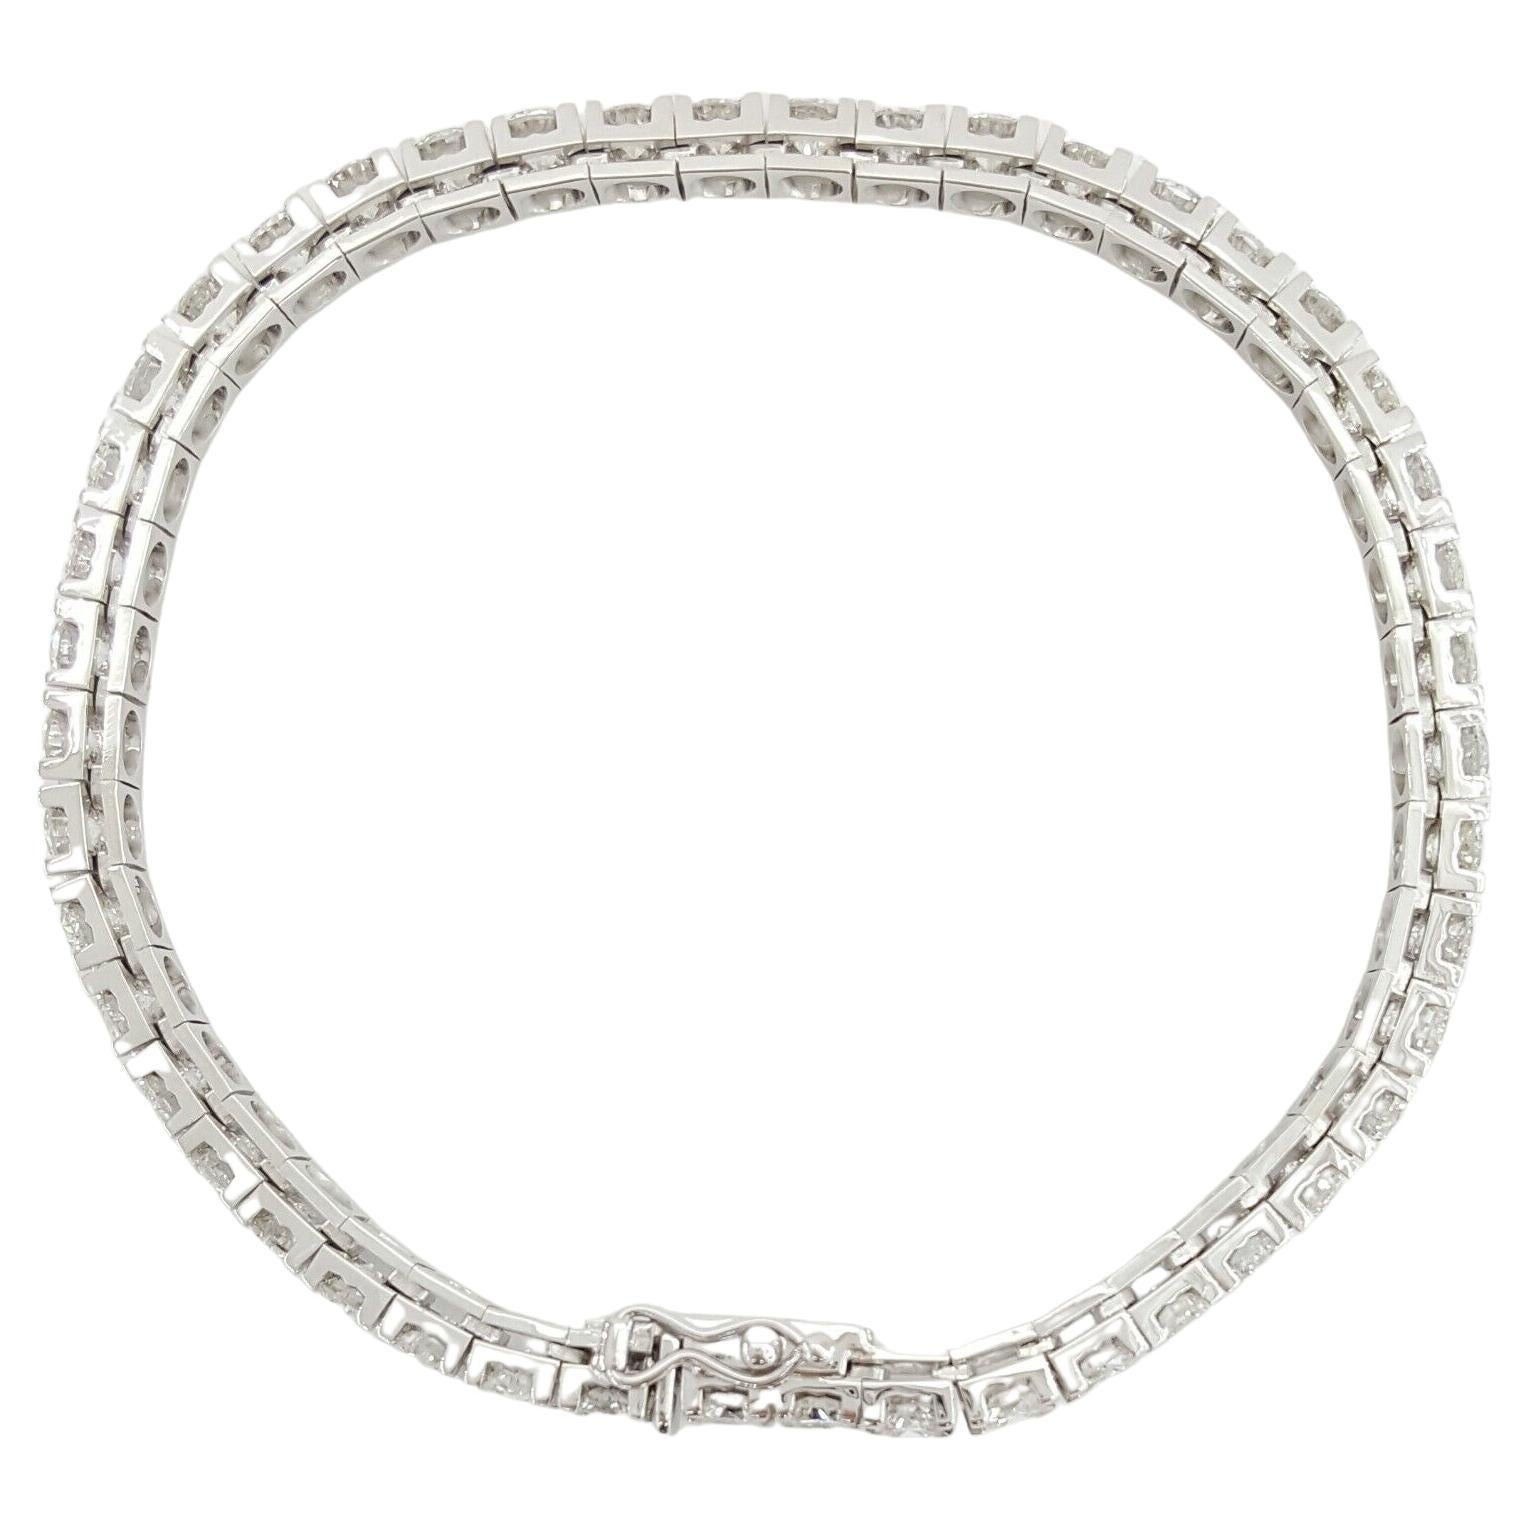  10.86 ct total weight Round Brilliant Cut Diamond Straight Line Tennis Bracelet in 14K White Gold.

The bracelet weighs 16 grams, 7.25